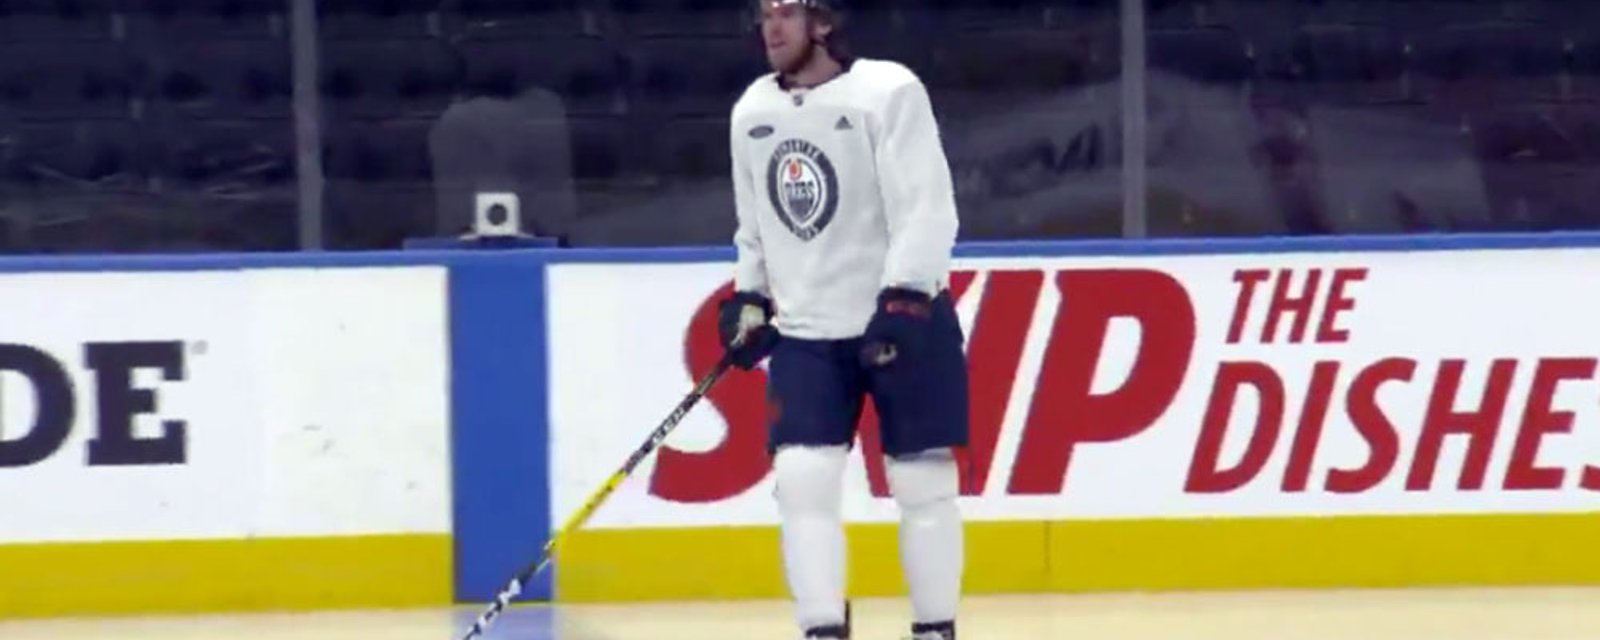 Major update on McDavid from Oilers practice this morning